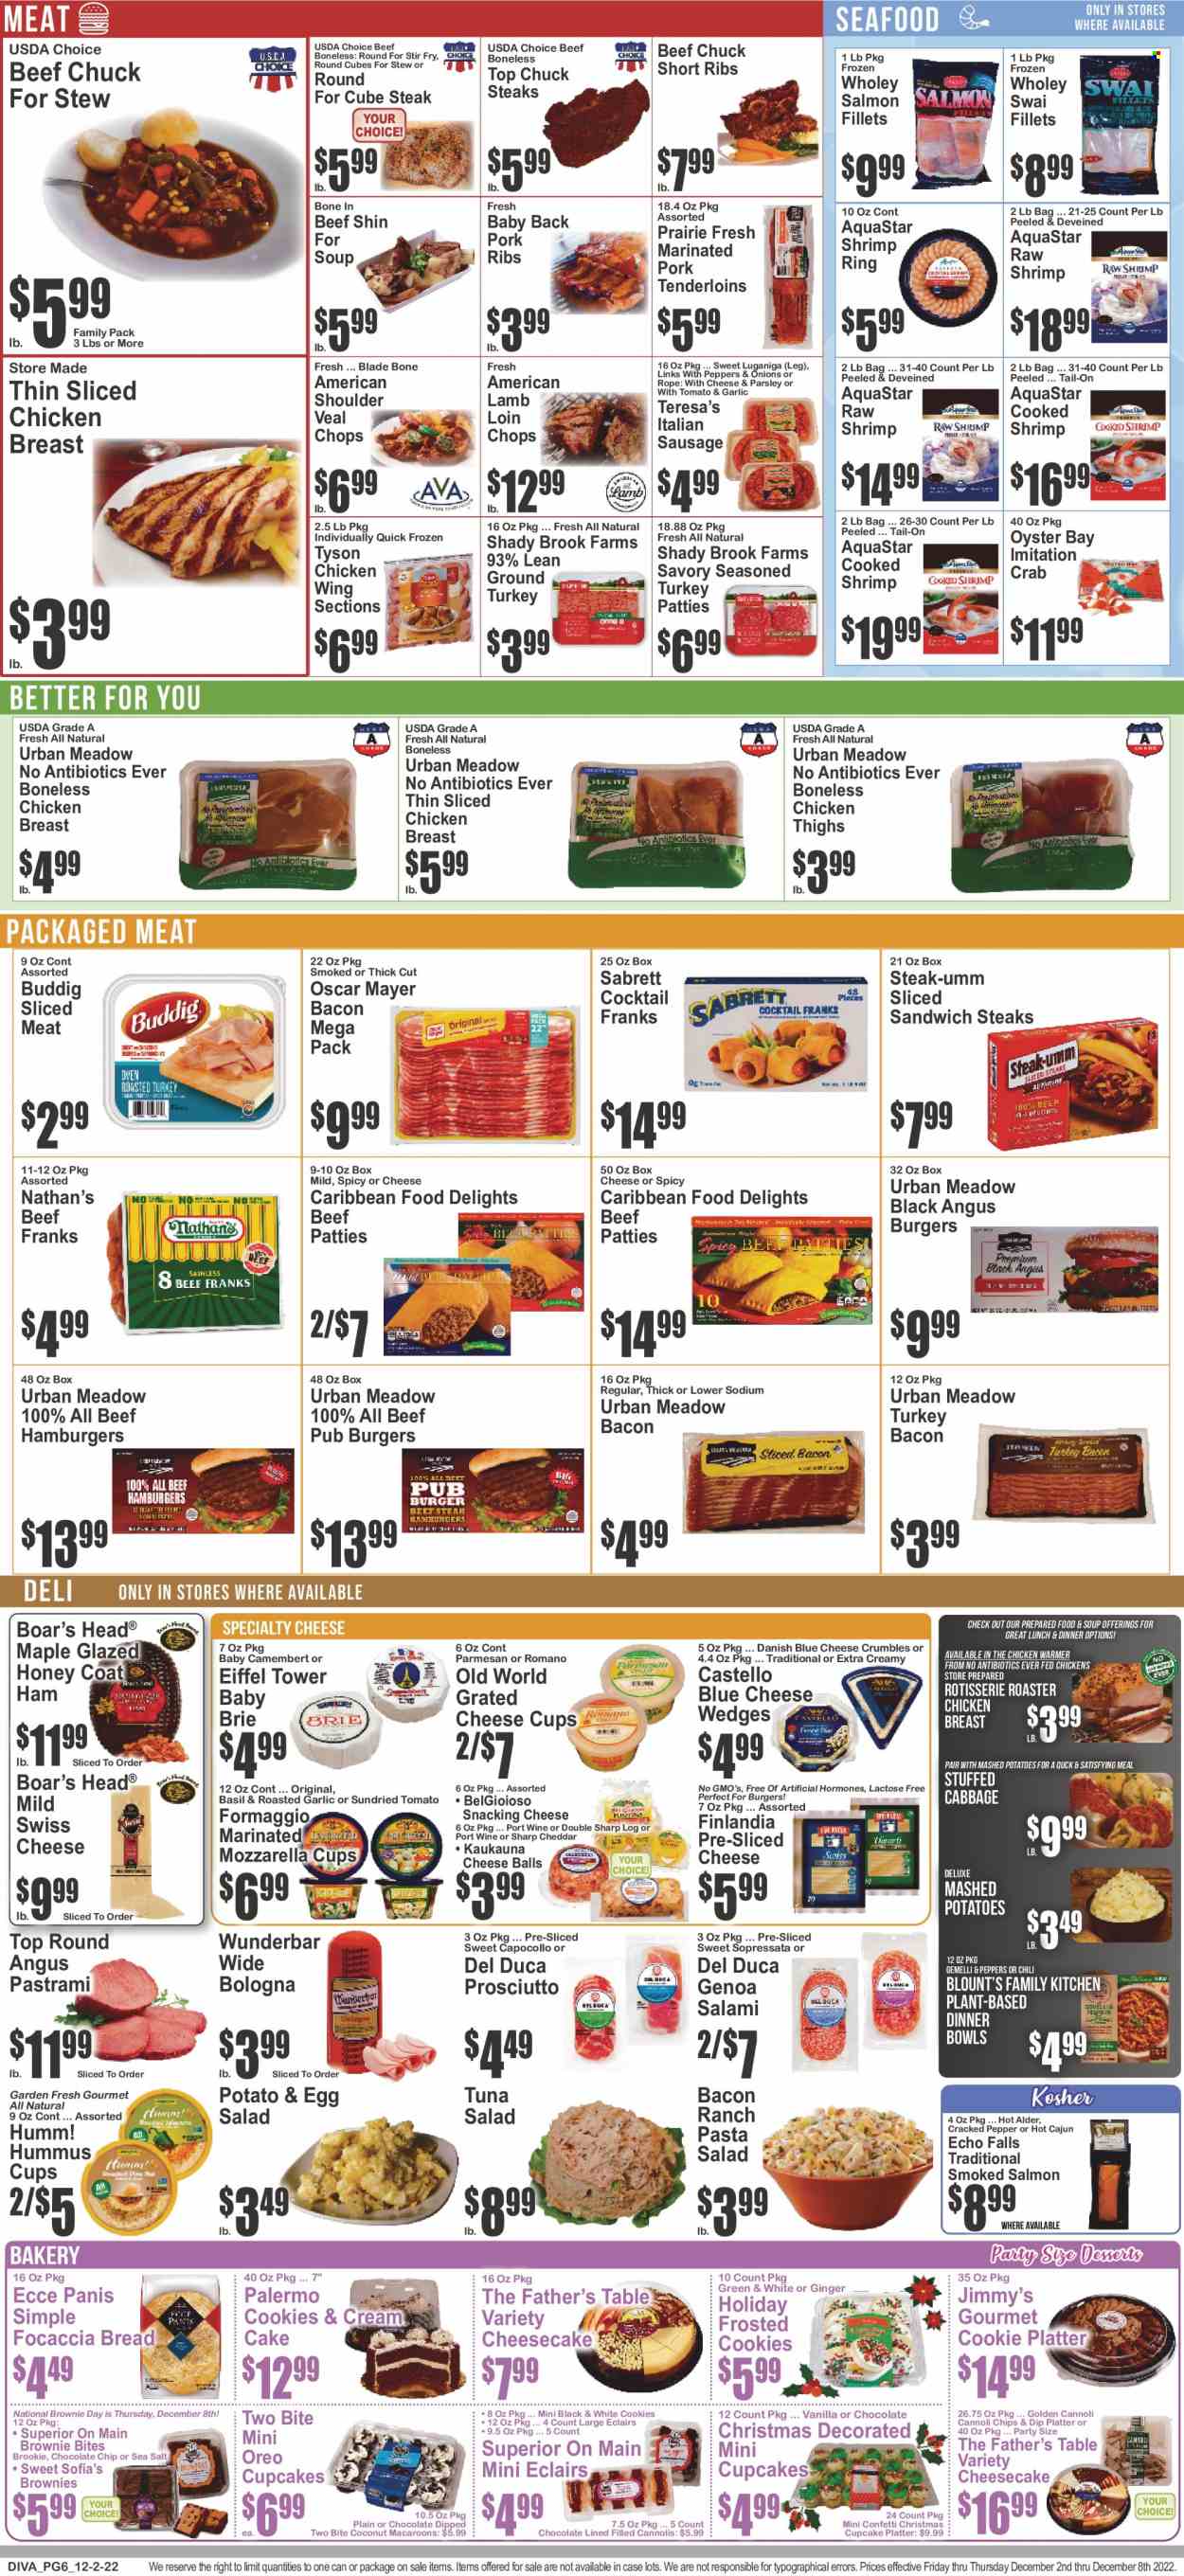 thumbnail - Key Food Flyer - 12/02/2022 - 12/08/2022 - Sales products - bread, cake, focaccia, Father's Table, cupcake, cheesecake, brownies, ginger, parsley, salad, salmon, salmon fillet, smoked salmon, tuna, oysters, seafood, crab, shrimps, swai fillet, mashed potatoes, sandwich, soup, hamburger, pasta, bacon, salami, turkey bacon, ham, prosciutto, pastrami, bologna sausage, Oscar Mayer, sausage, italian sausage, hummus, tuna salad, pasta salad, blue cheese, camembert, mozzarella, sliced cheese, swiss cheese, cheese cup, parmesan, brie, grated cheese, cheese crumbles, Oreo, eggs, dip, cookies, wine, port wine, ground turkey, chicken breasts, chicken thighs, beef meat, veal cutlet, veal meat, steak, pork meat, pork ribs, pork tenderloin, pork back ribs, marinated pork, lamb loin, lamb meat, cup. Page 7.